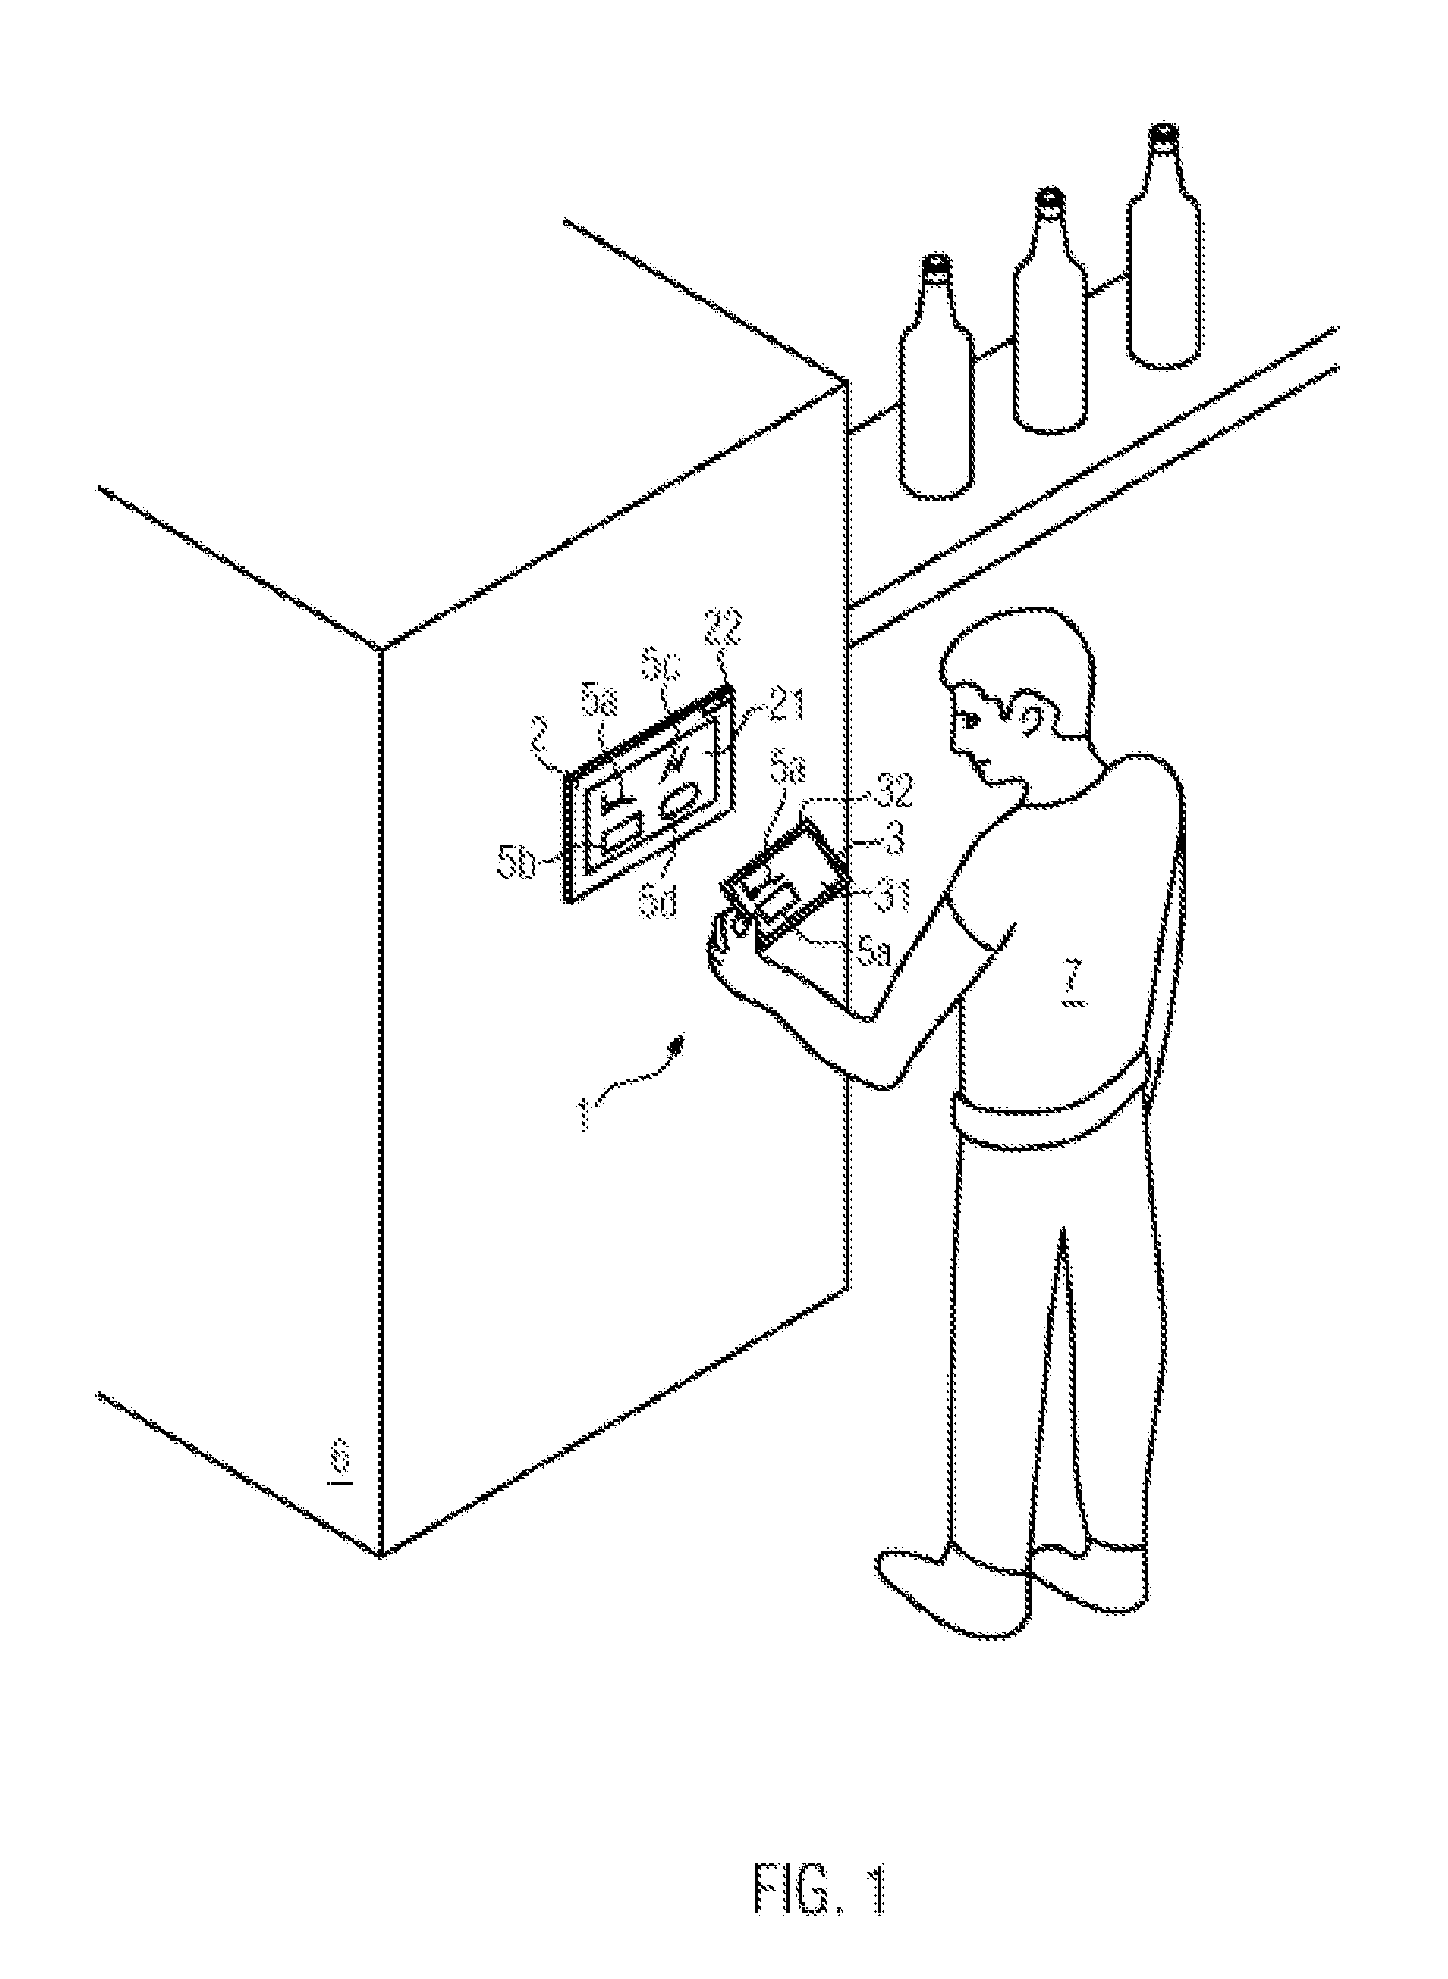 Operating system for a container handling machine, an operating device and a separate additional screen